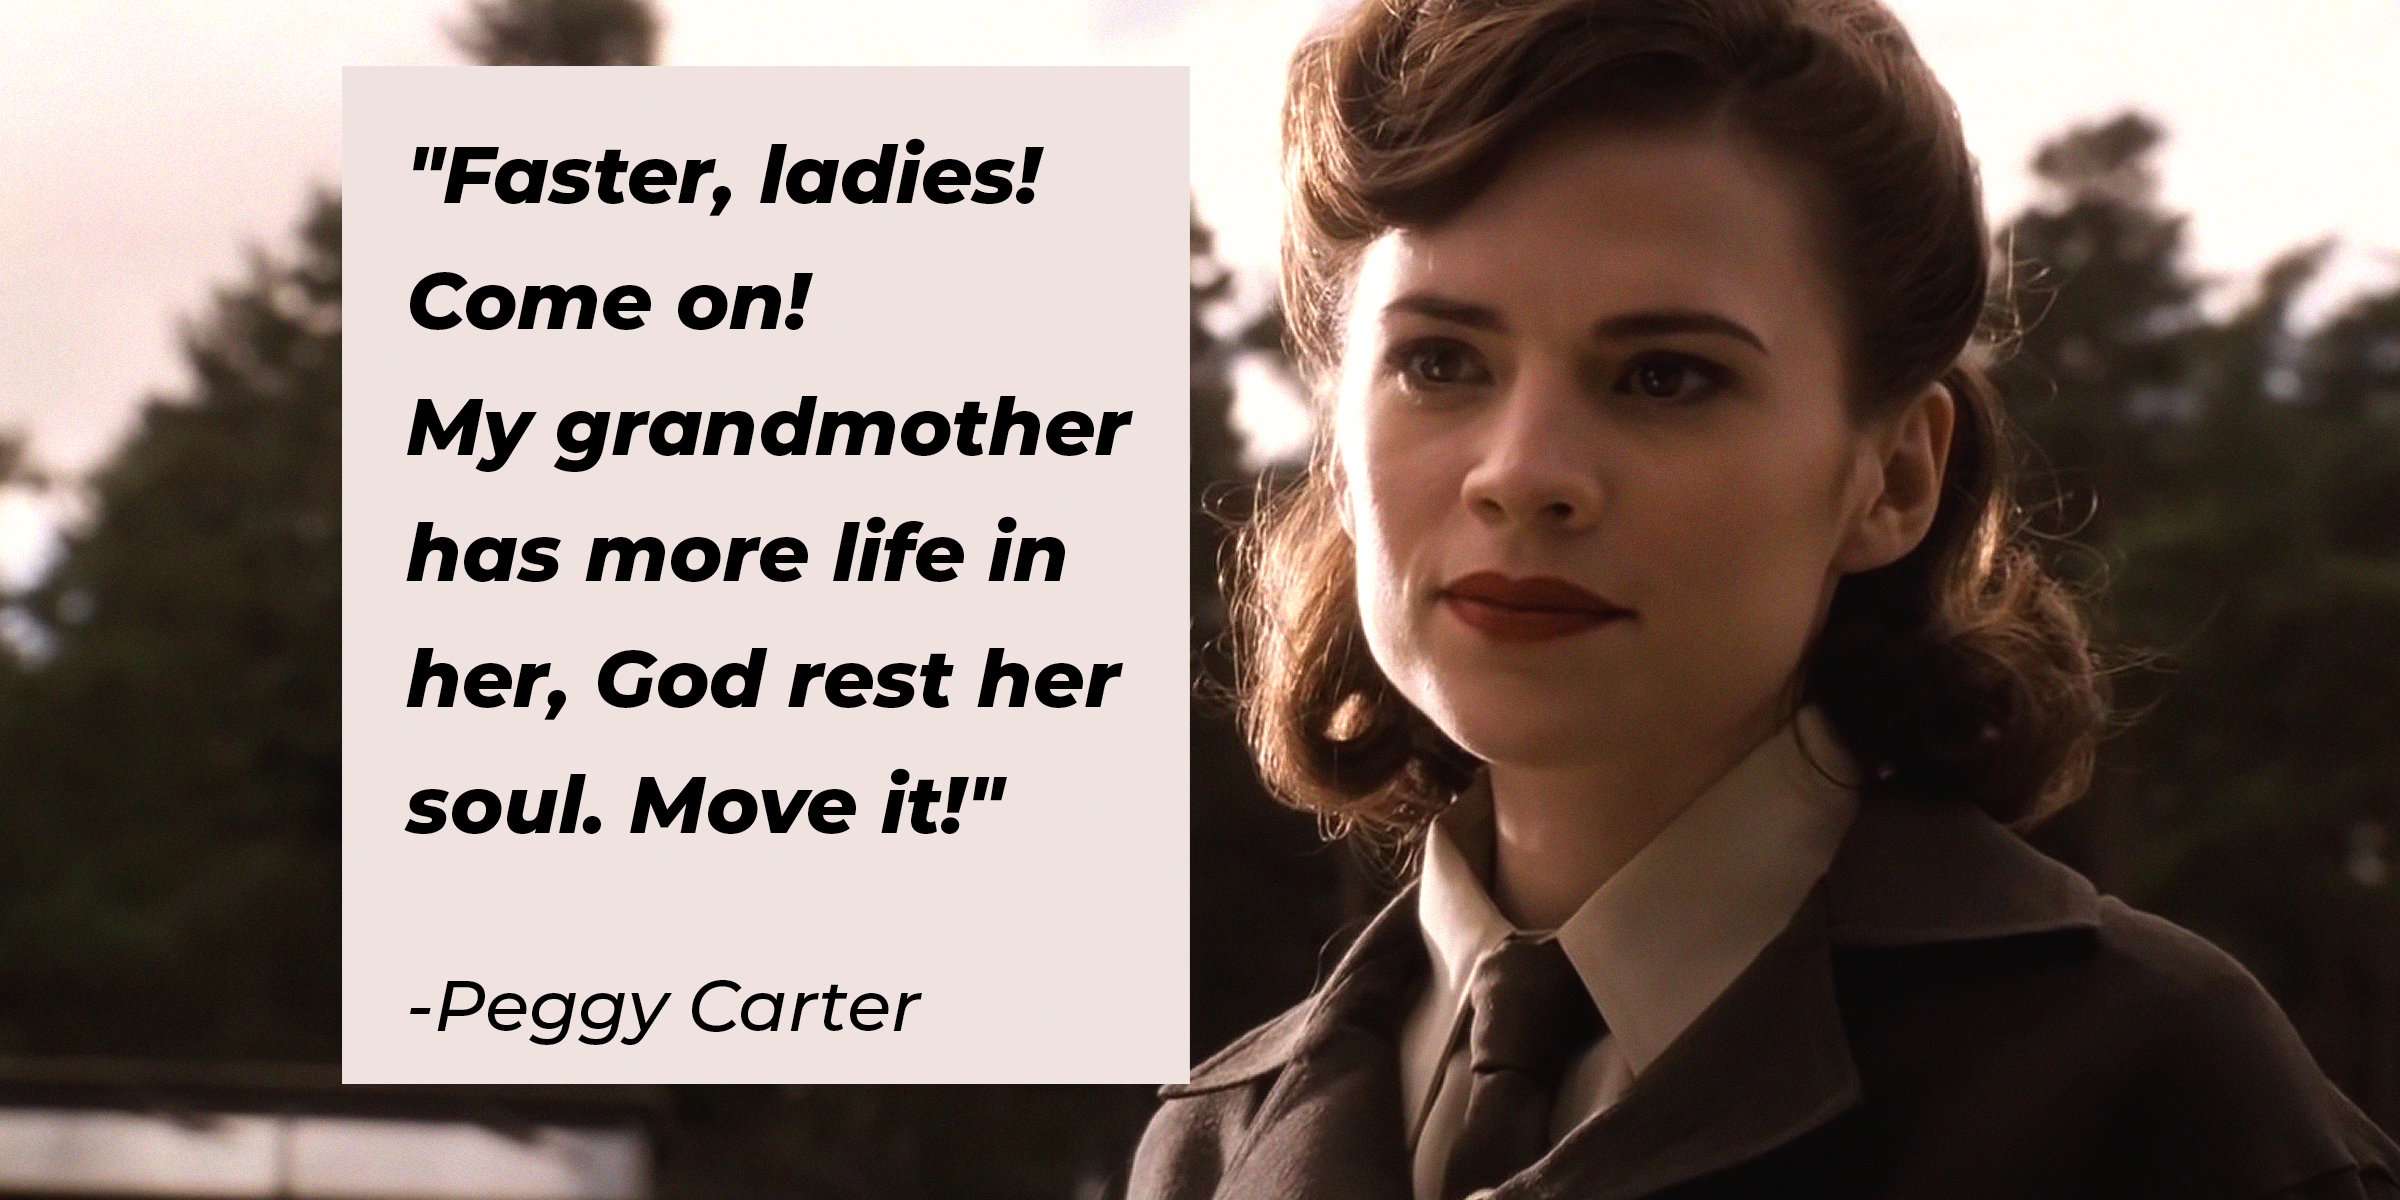 Photo of Peggy Carter with the quote: "Faster, ladies! Come on! My grandmother has more life in her, God rest her soul. move it!" | Source: Facebook.com/marvelstudios